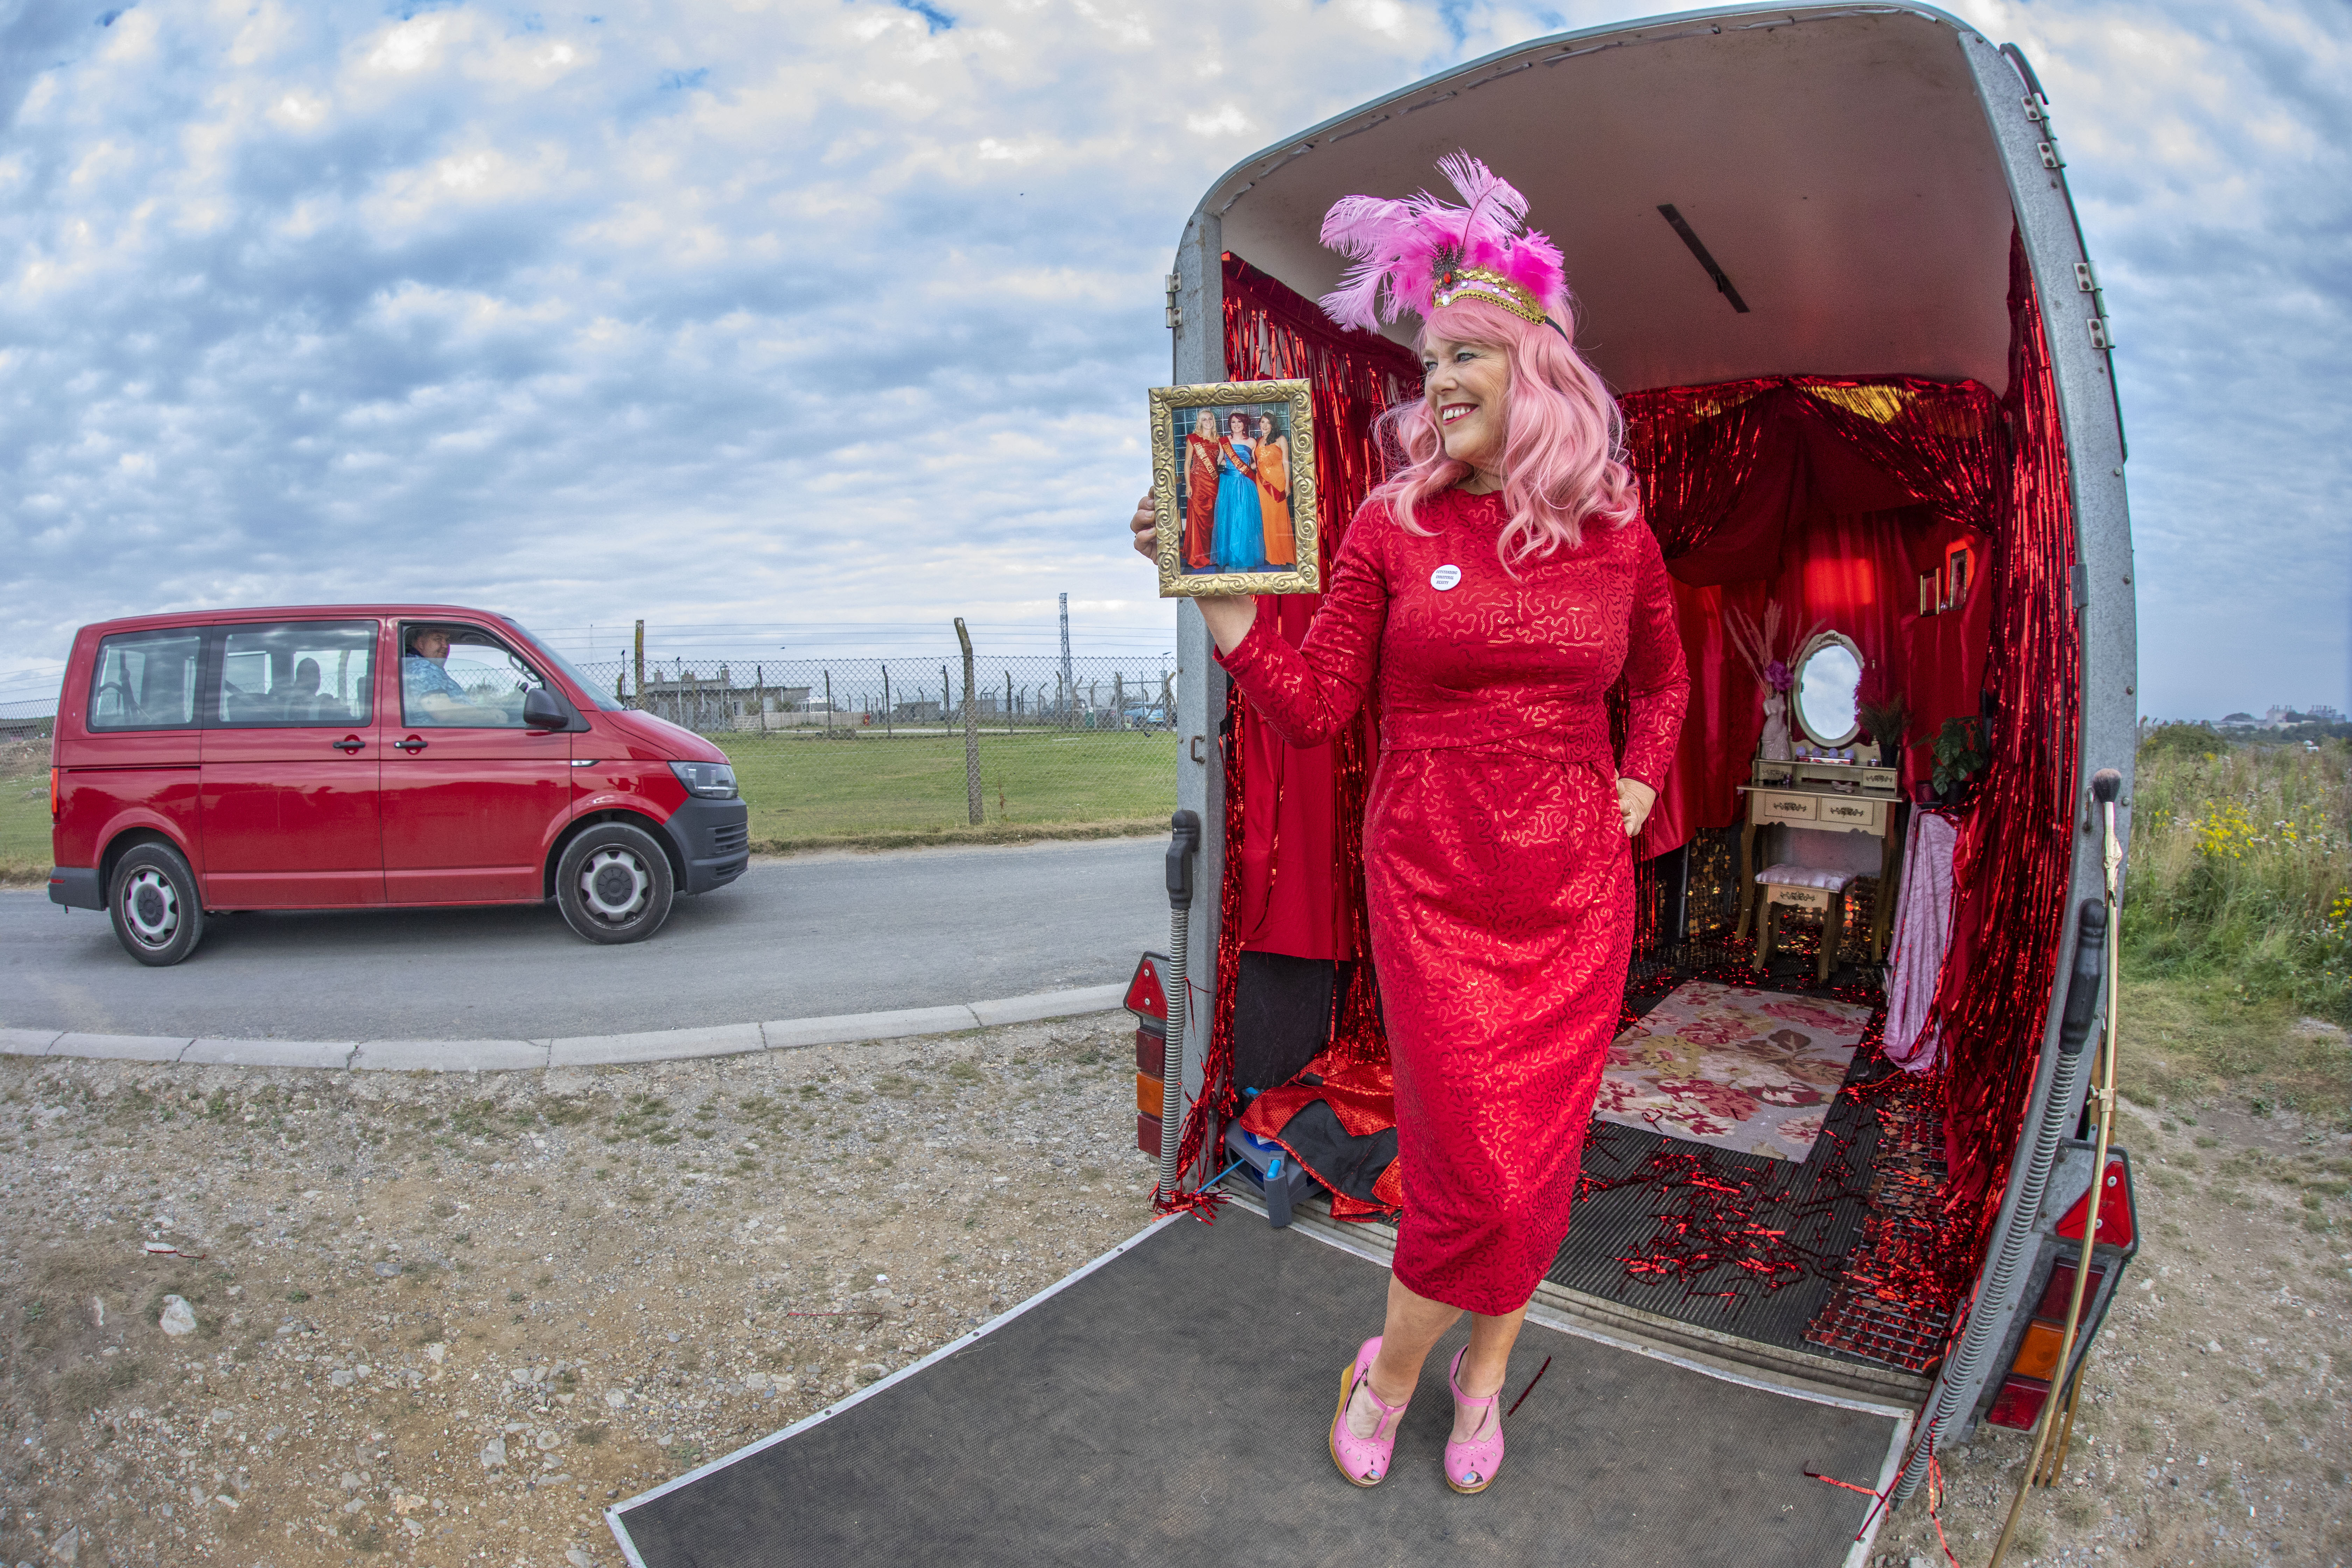 In an outdoor setting the side of a road, a woman, dressed head to toe in red, wearing a pink wig and makeup, stands next to a horse box. The inside of the horsebox is ellaborately decorated in shades of red and pink.